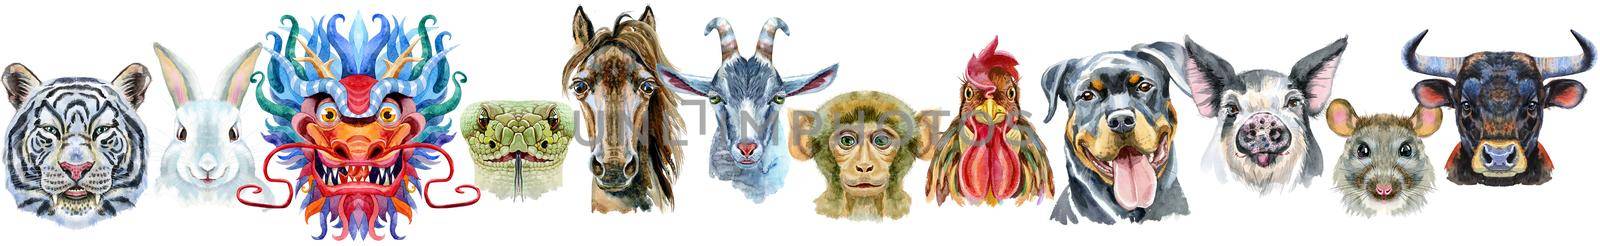 Border from watercolor twelve chinese zodiac animals by NataOmsk